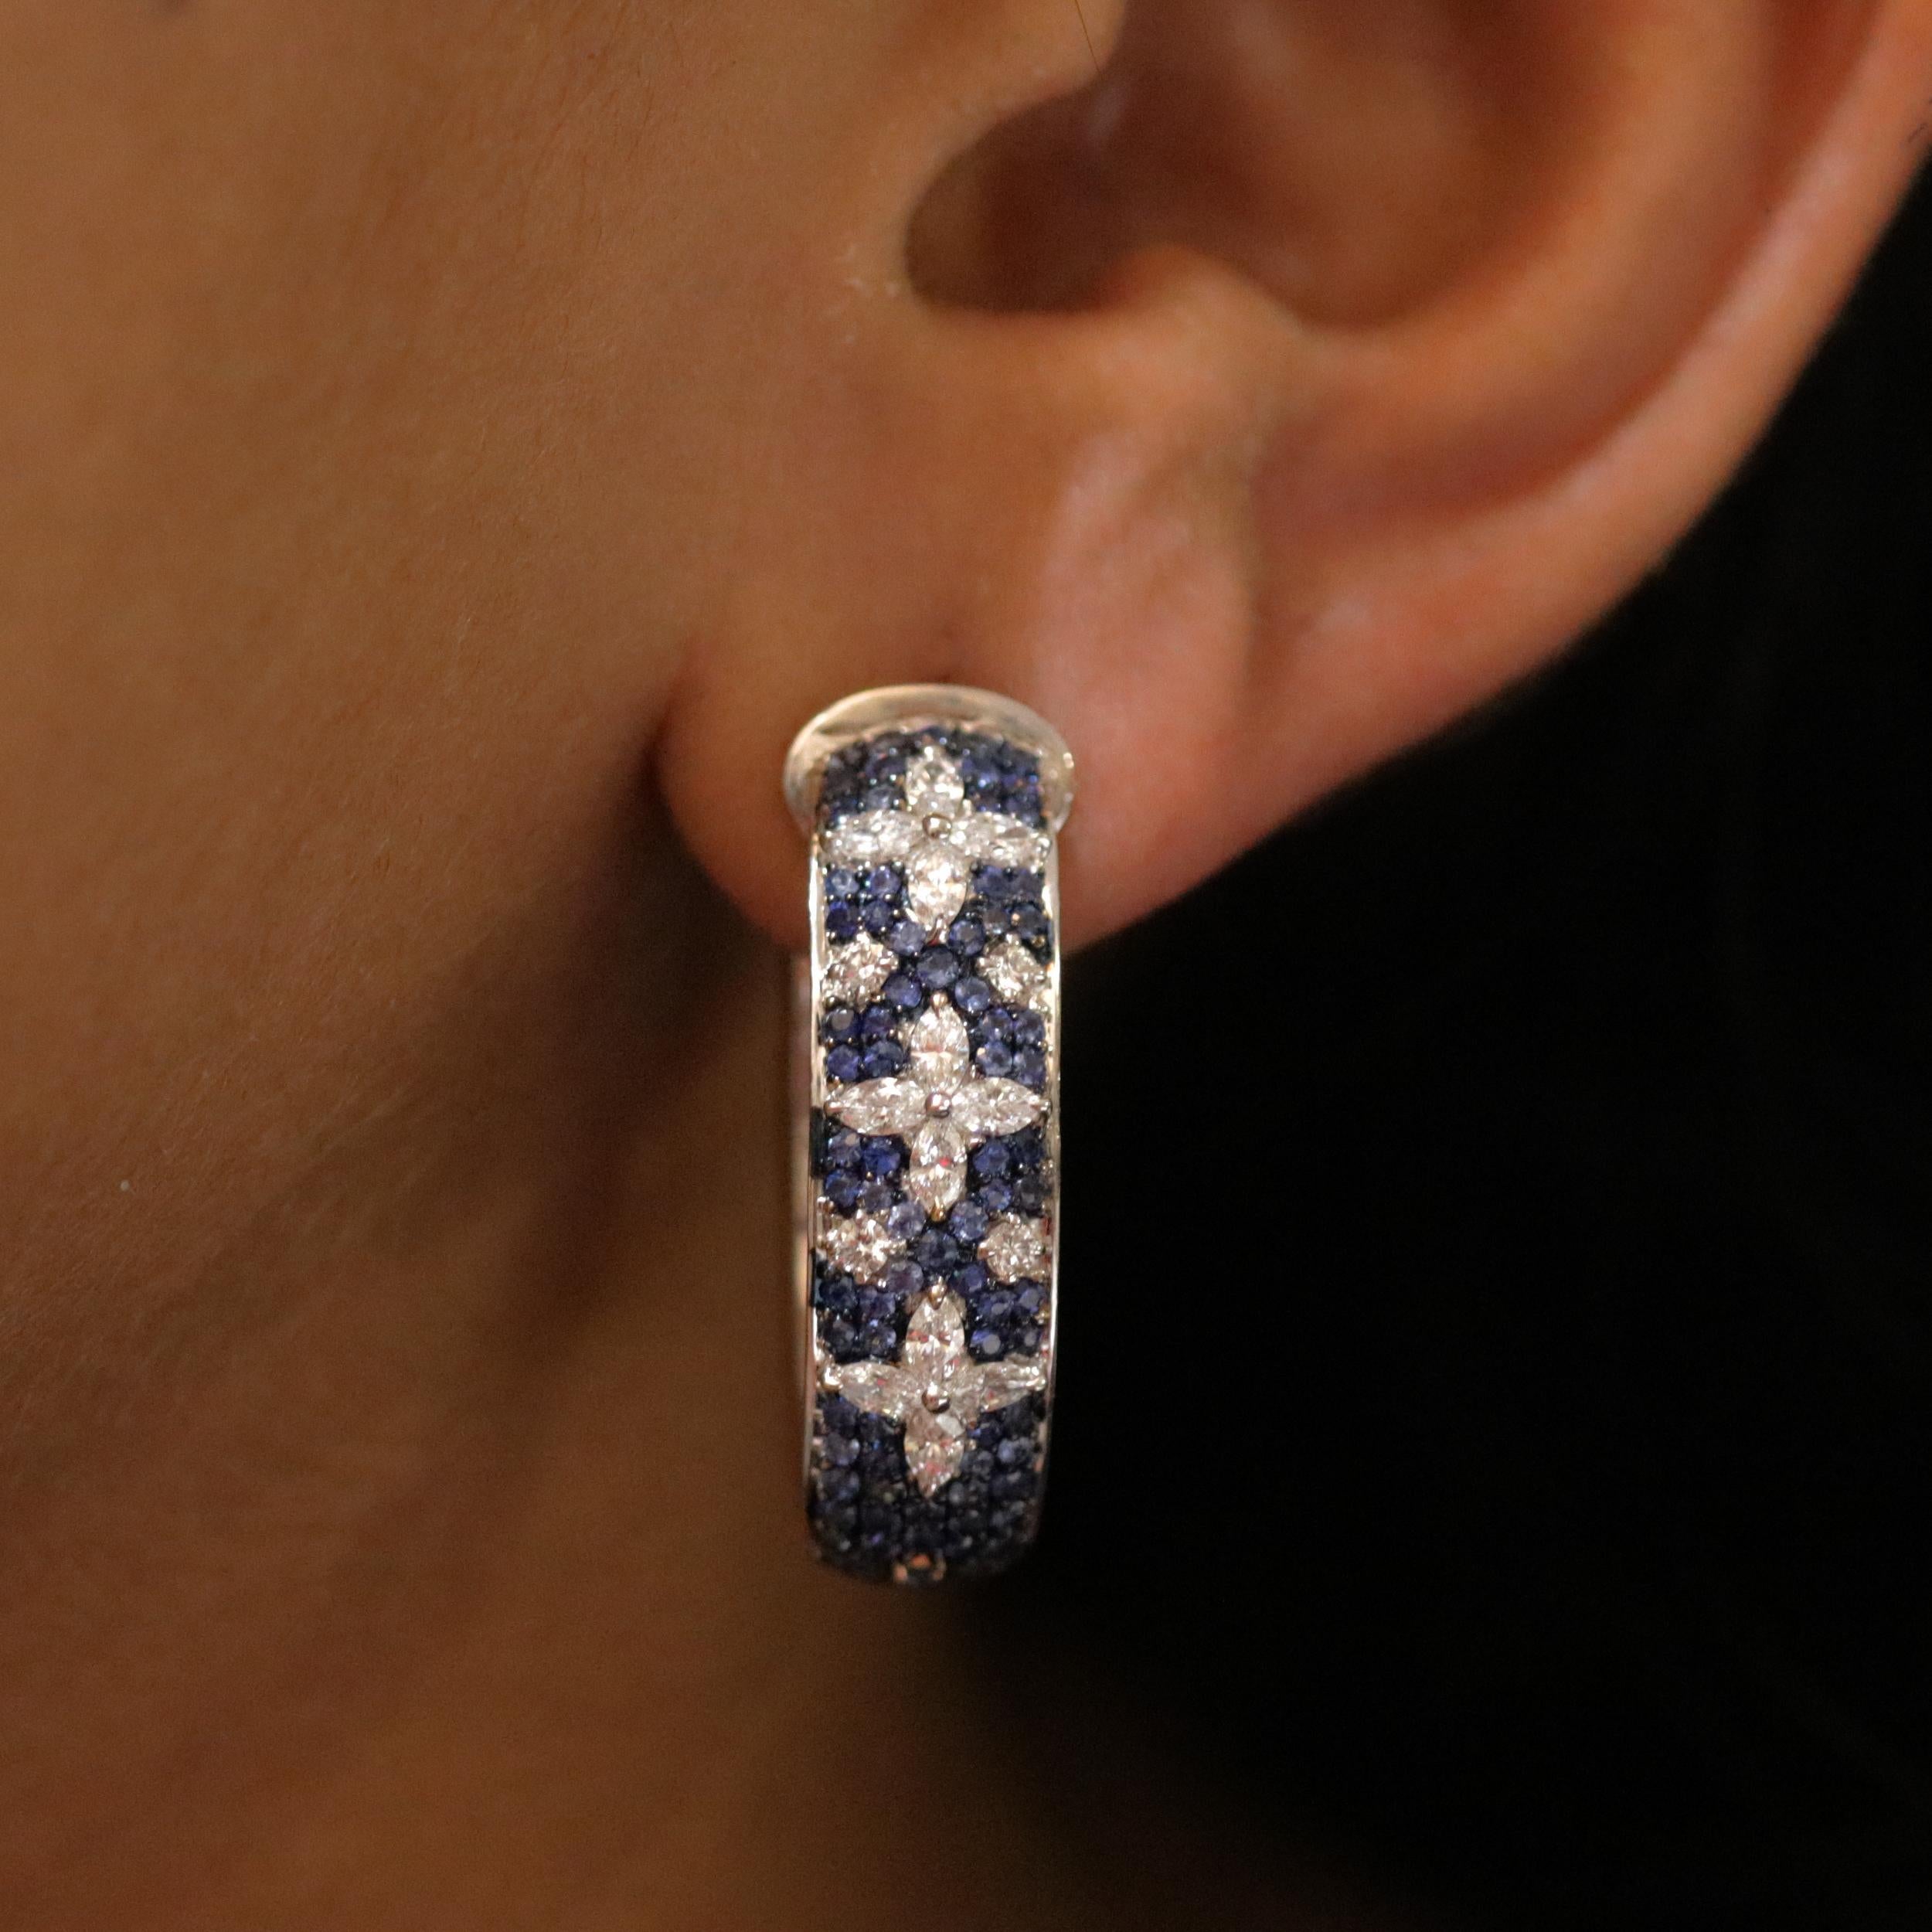 Gross Weight: 17.88 Grams
Diamond Weight: 2.20 cts
Blue Sapphire Weight: 4.56 cts
IGI Certificate: 31J857351810

Video of the product can be shared on request.

This 18K white gold hoop earrings created with a bed of blue sapphires, accentuated with